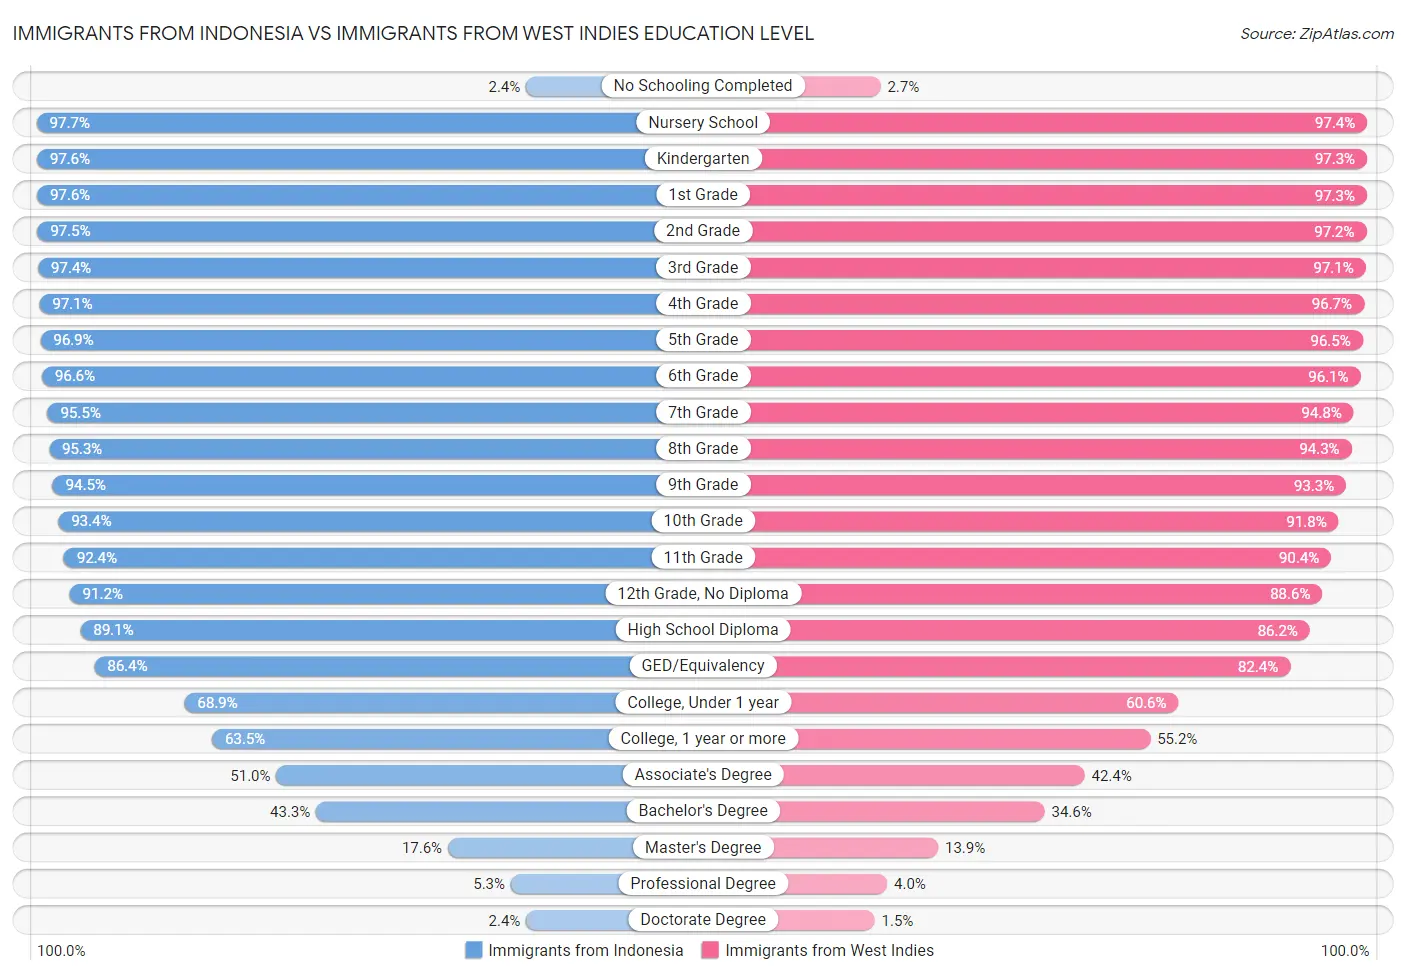 Immigrants from Indonesia vs Immigrants from West Indies Education Level